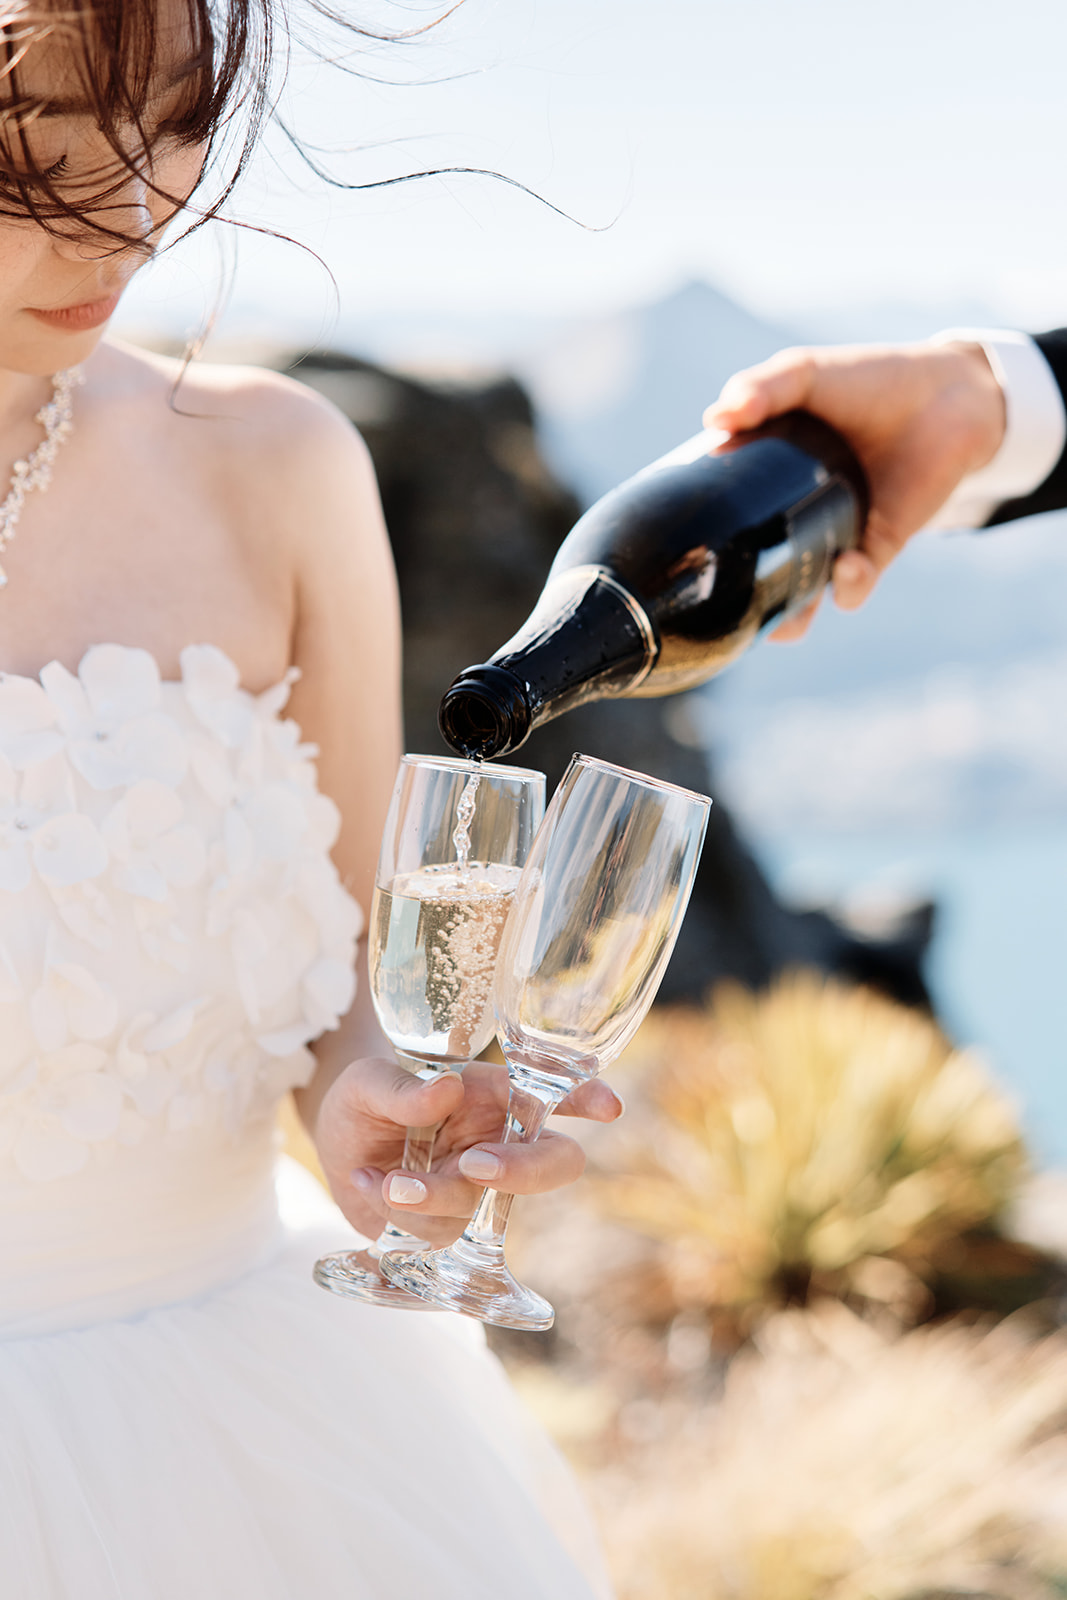 Queenstown Wedding Photographer A クイーンズタウン結婚式 with the bride and groom pouring wine into glasses.